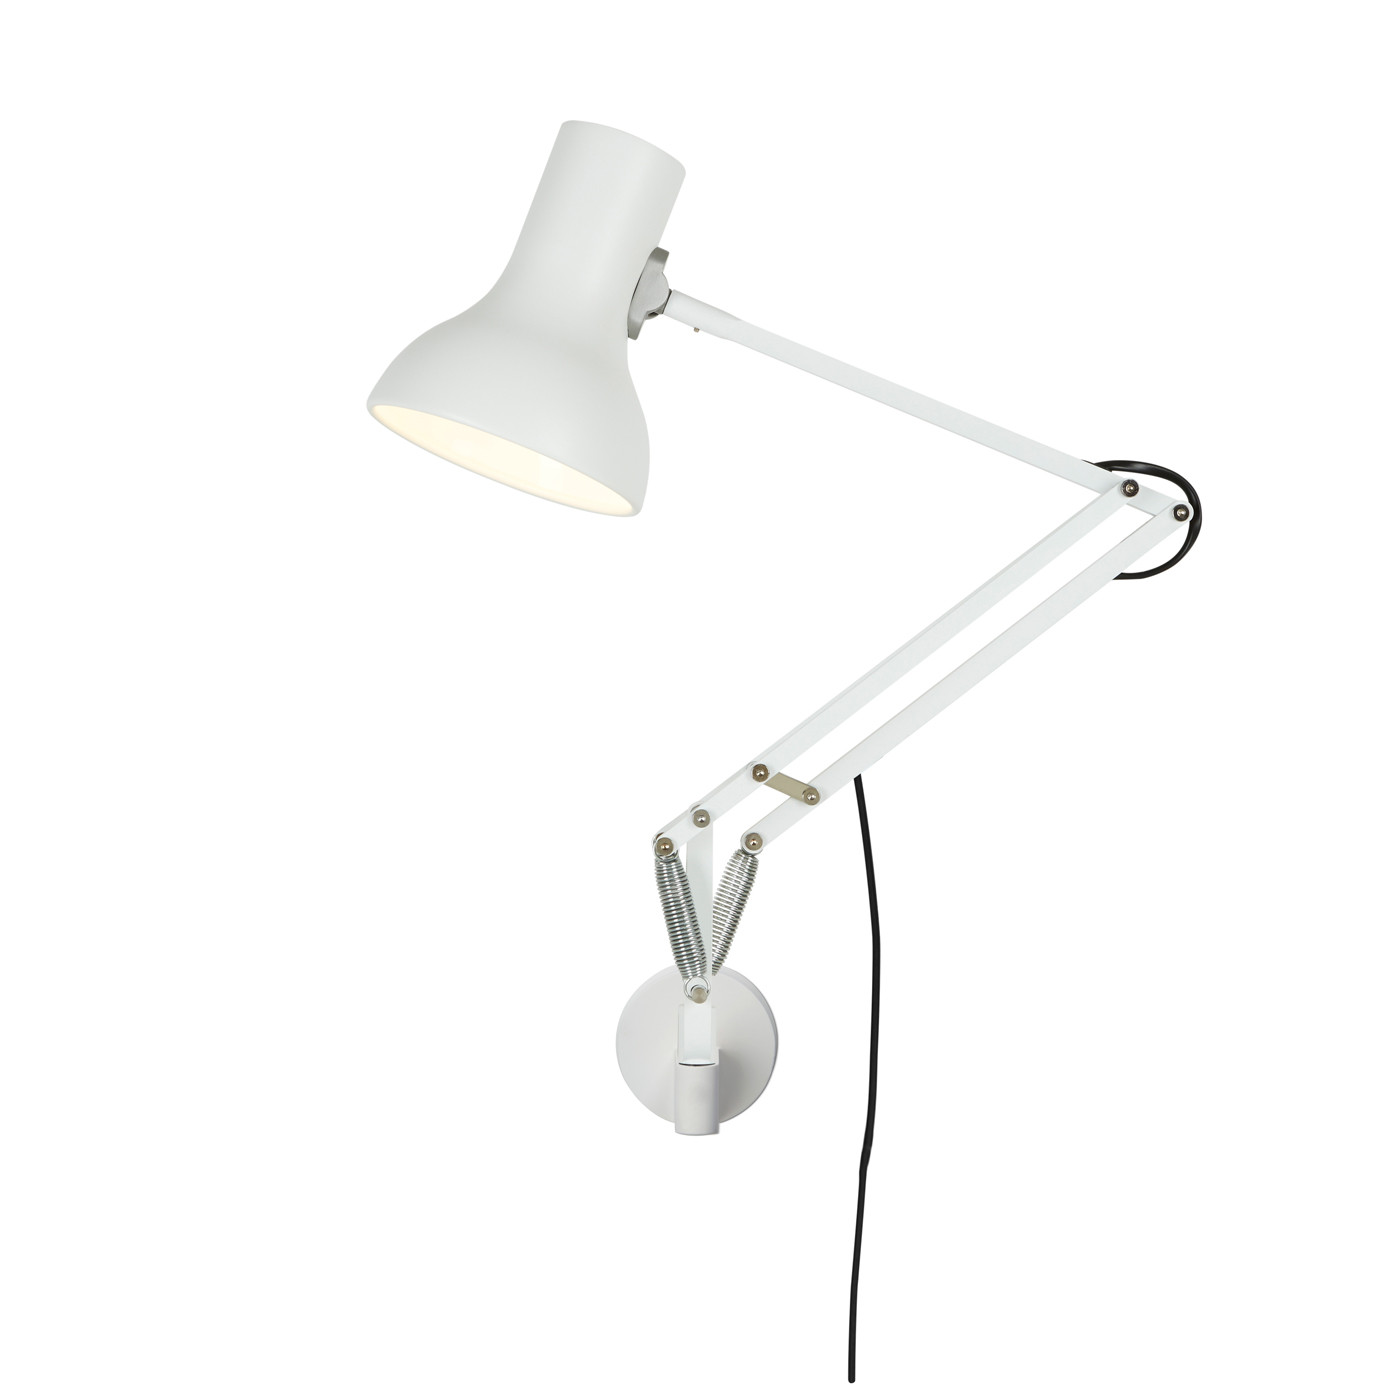 Anglepoise Type 75 Mini Lamp with Wall Bracket